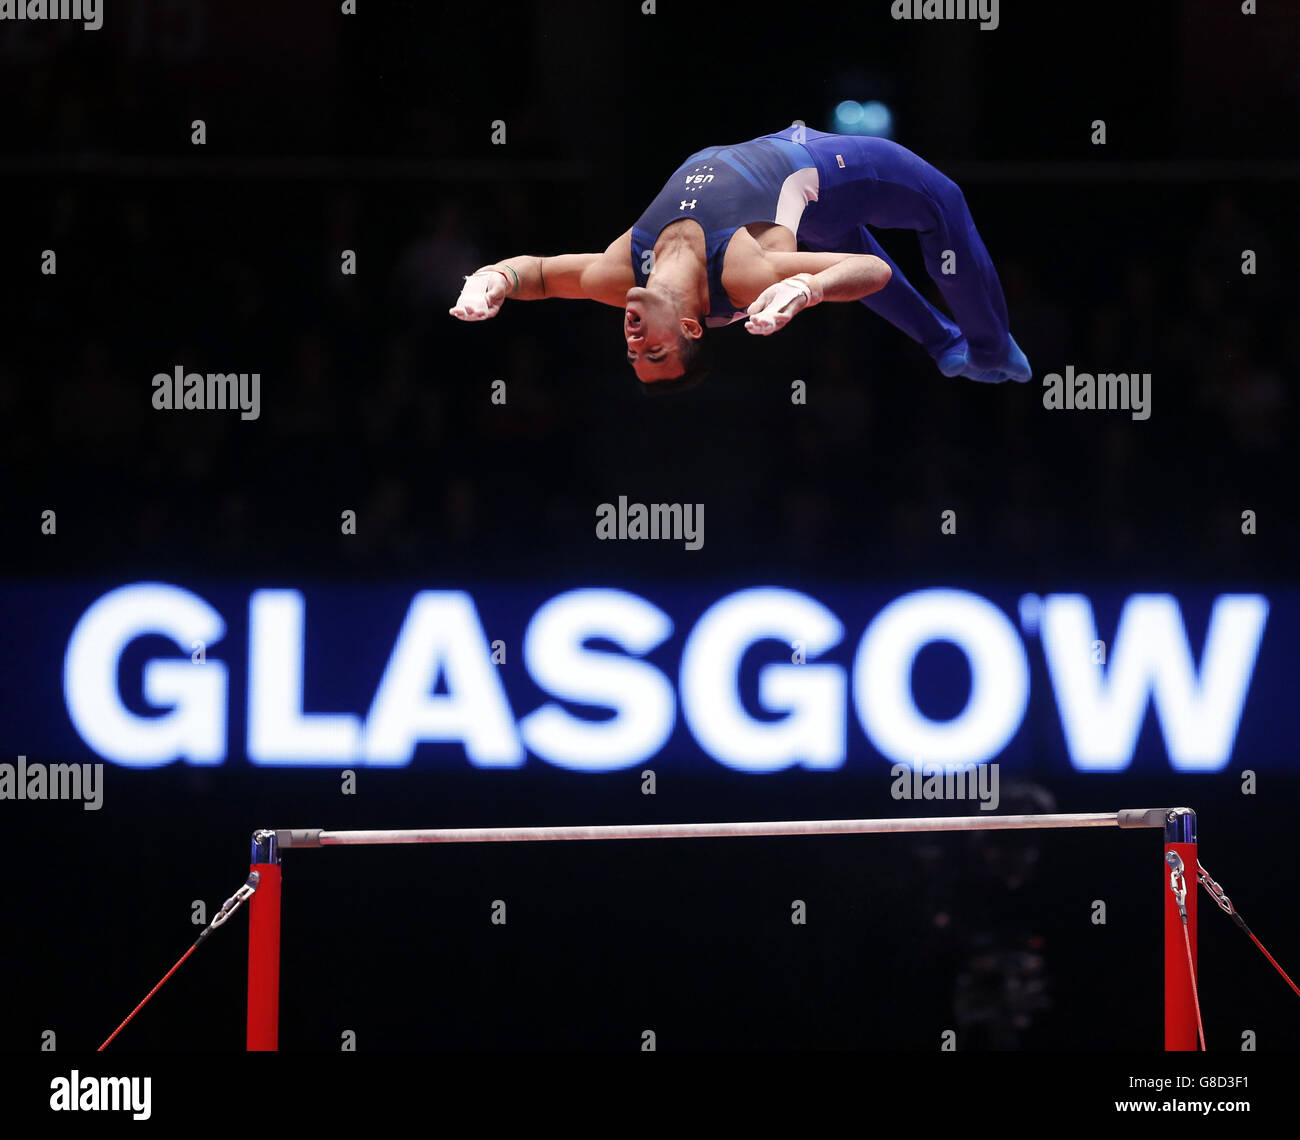 Gymnastics - 2015 World Championships - Day Four - The SSE Hydro. USA's Danell Leyva competes on the Horizontal Bar during day four of the 2015 World Gymnastic Championships at The SSE Hydro, Glasgow. Stock Photo